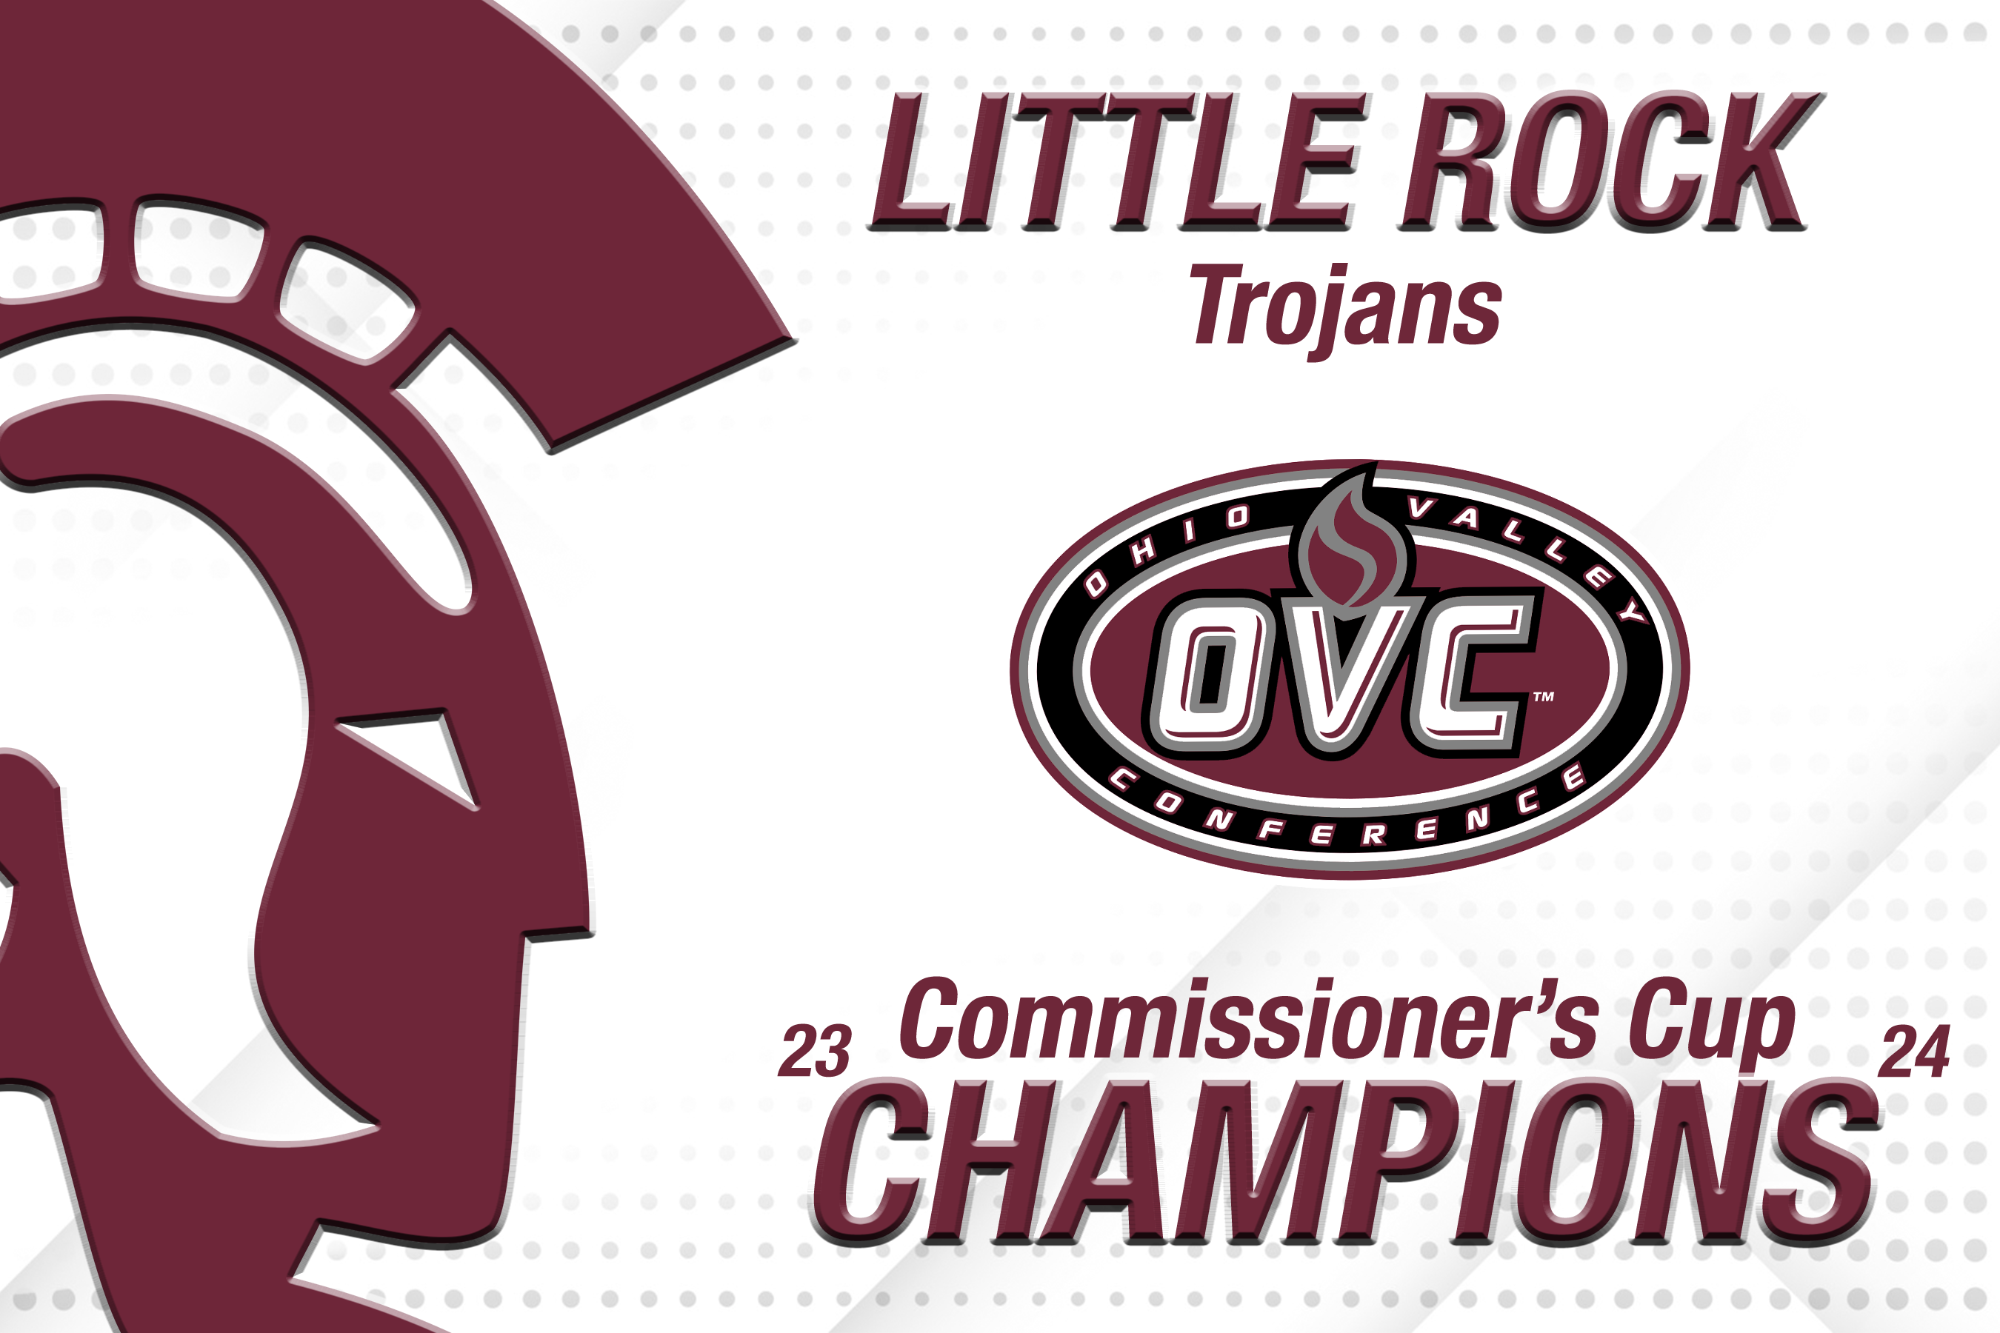 The Little Rock Trojans have been awarded the OVC Commissioner's Cup, which recognizes overall athletic excellence in league-sponsored championships.